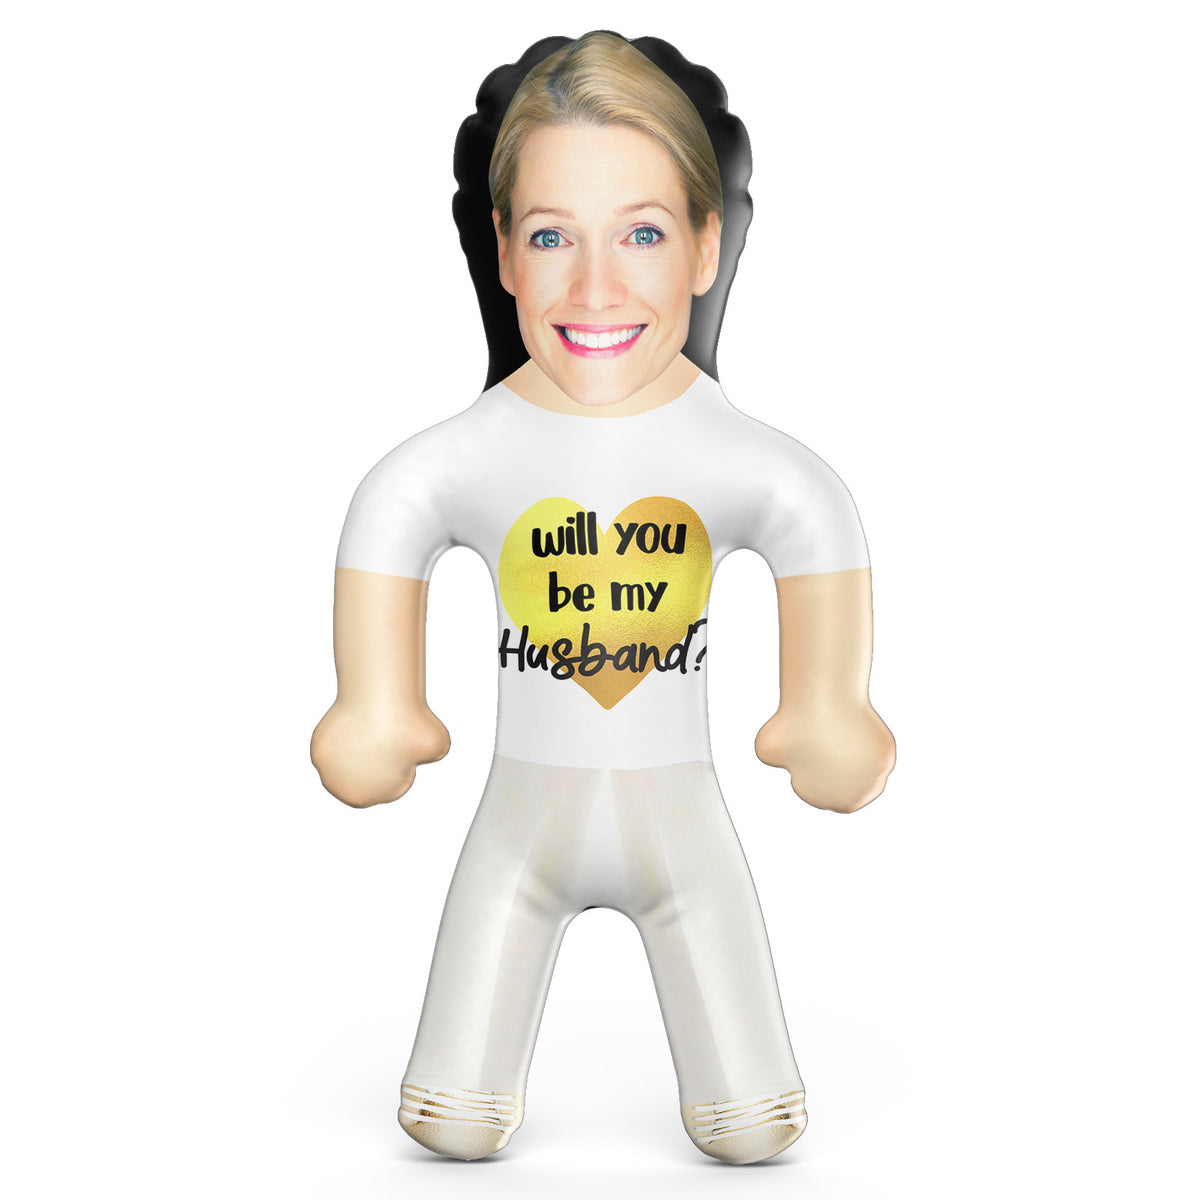 Will You Be My Husband? Inflatable Doll - Be My Husband Blow Up Doll